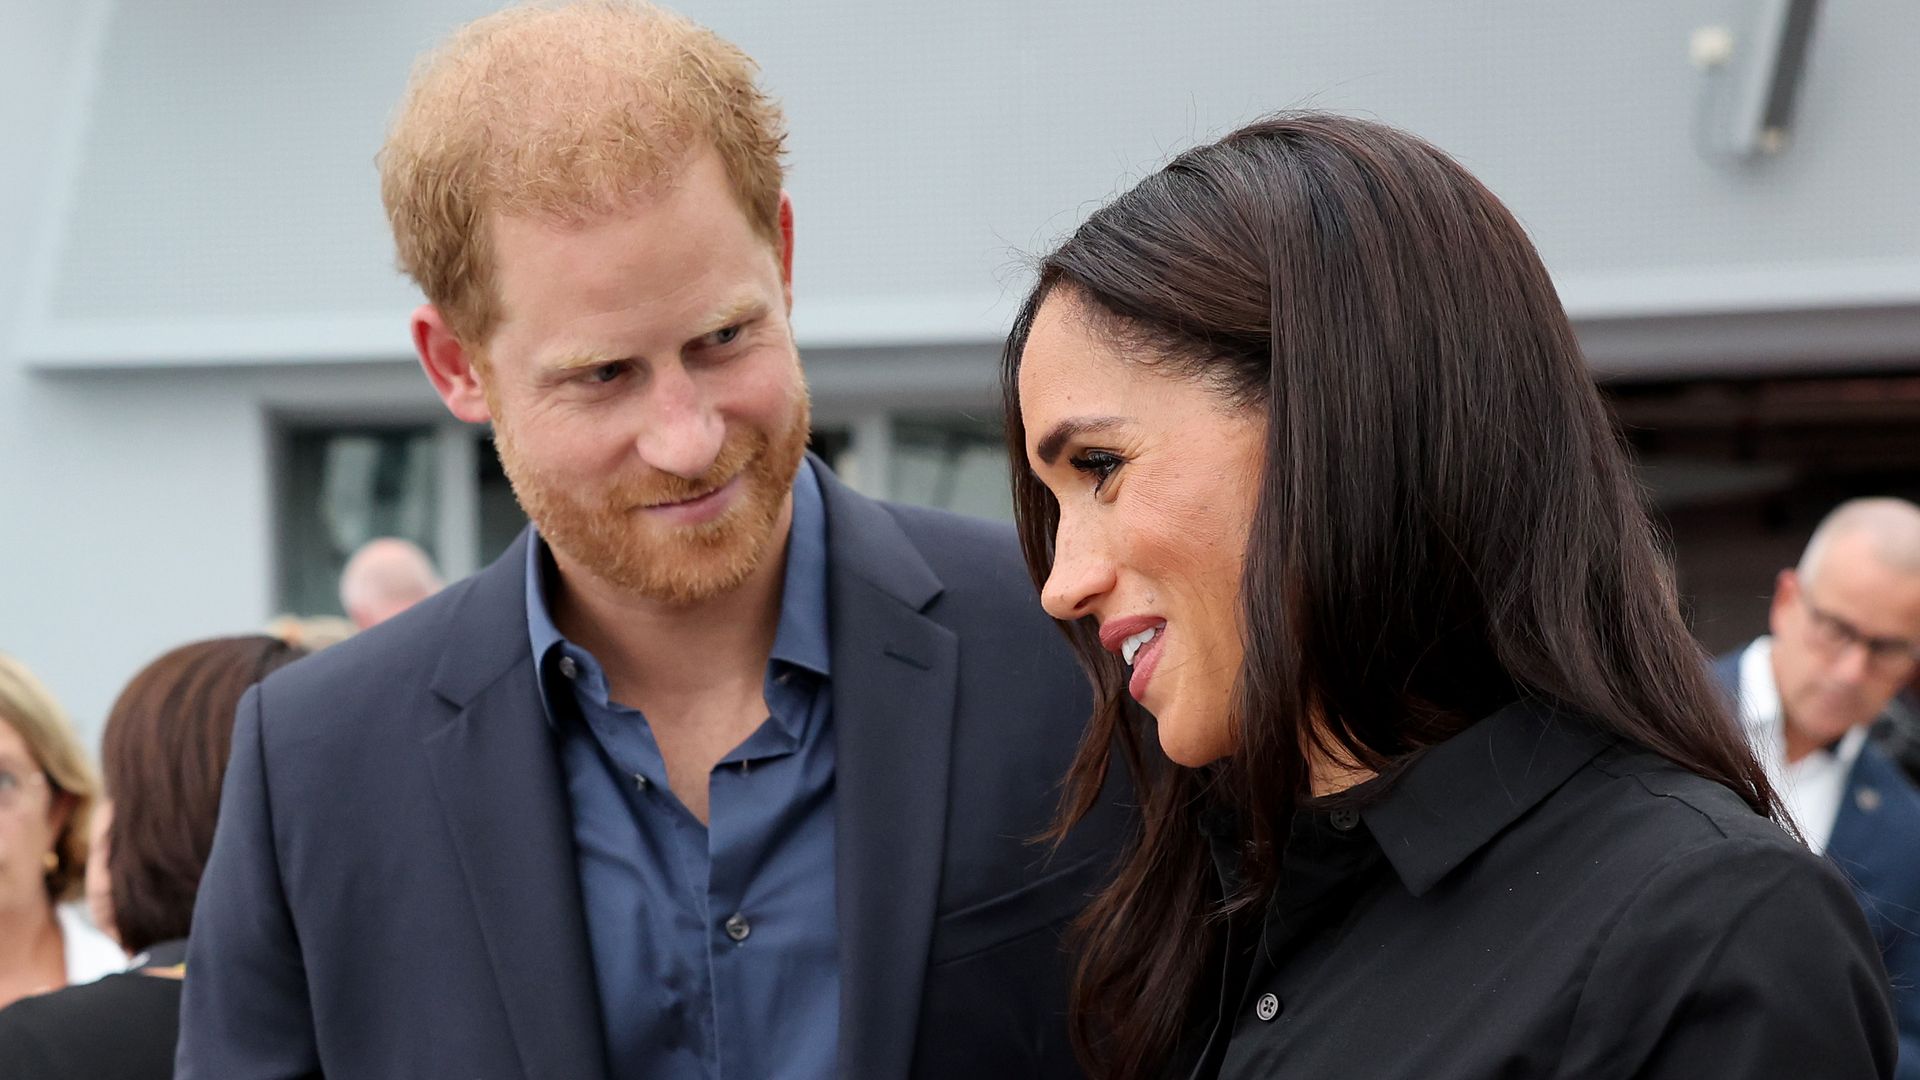 Prince Harry and Meghan Markle at the Friends and family dinner at the Invictus games